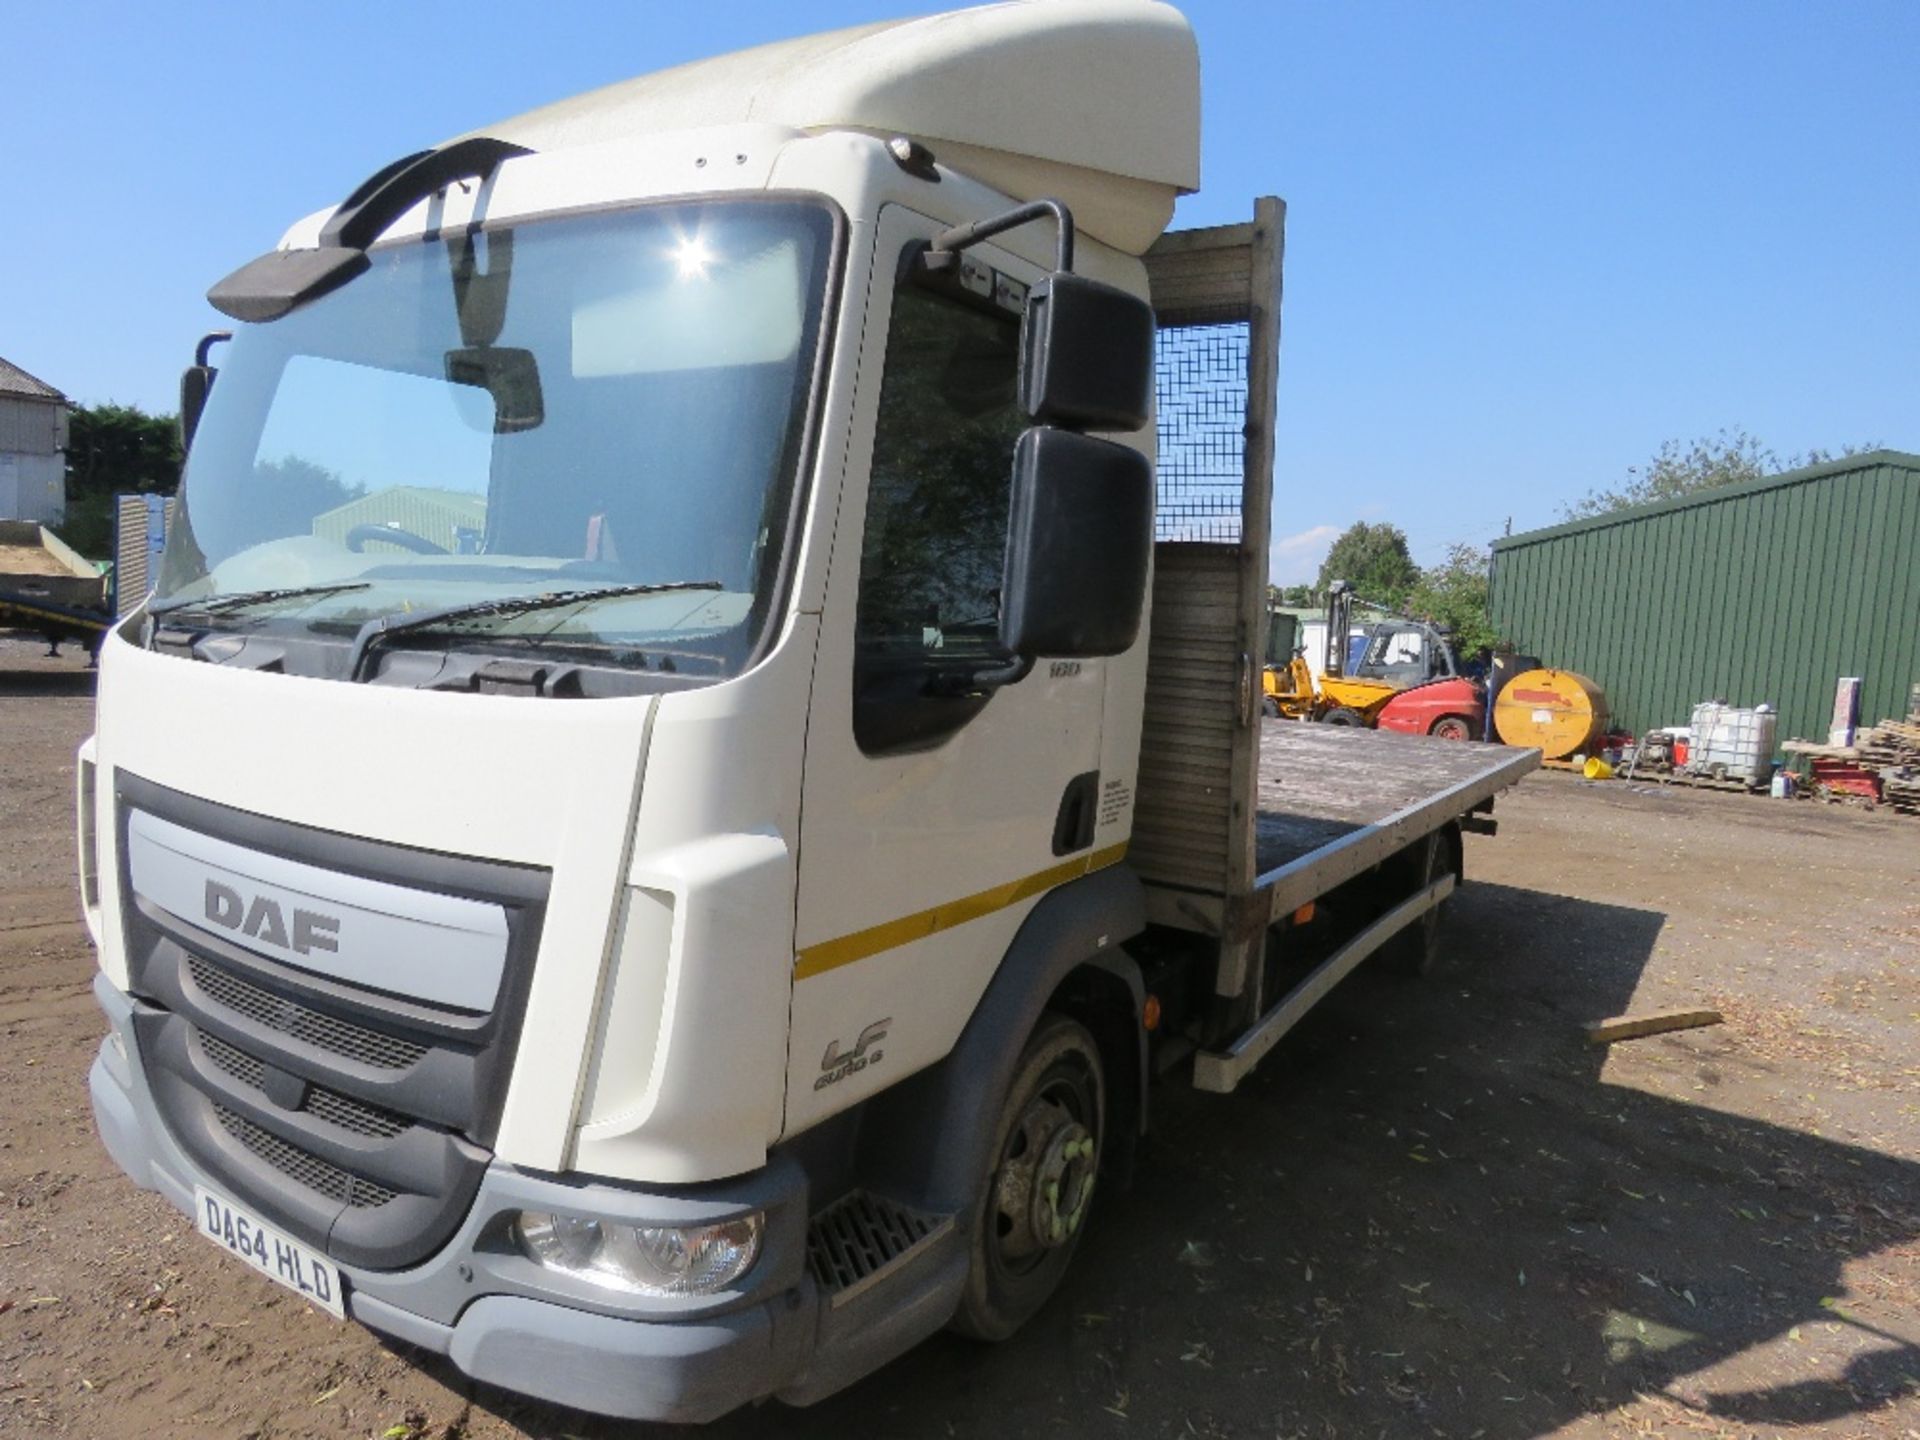 DAF LF180 FLAT BED LORRY REG:DA64 HLD. EURO 6. 7500KG RATED. AUTO GEARBOX. SOURCED FROM COMPANY LIQU - Image 3 of 13